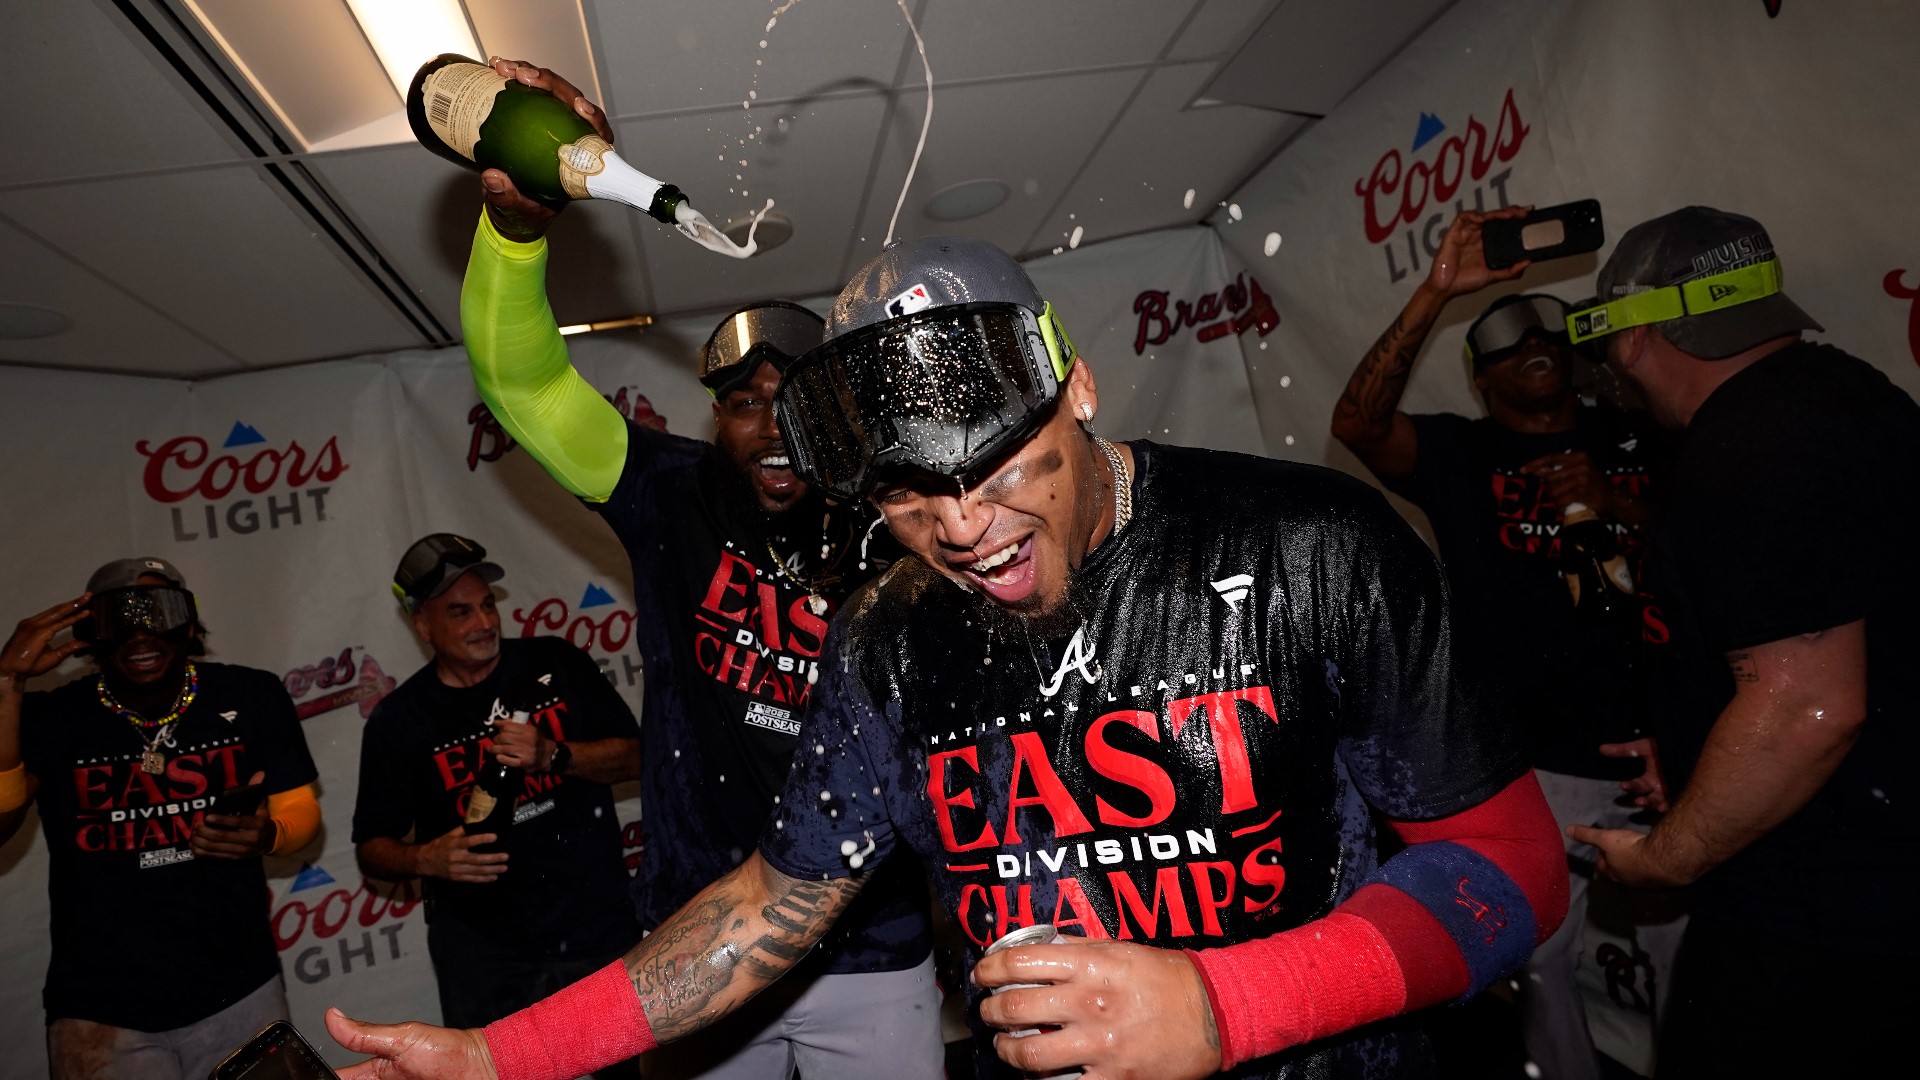 The champagne was on deck after the Braves beat the Phillies 4-1 to clinch the NL East title.